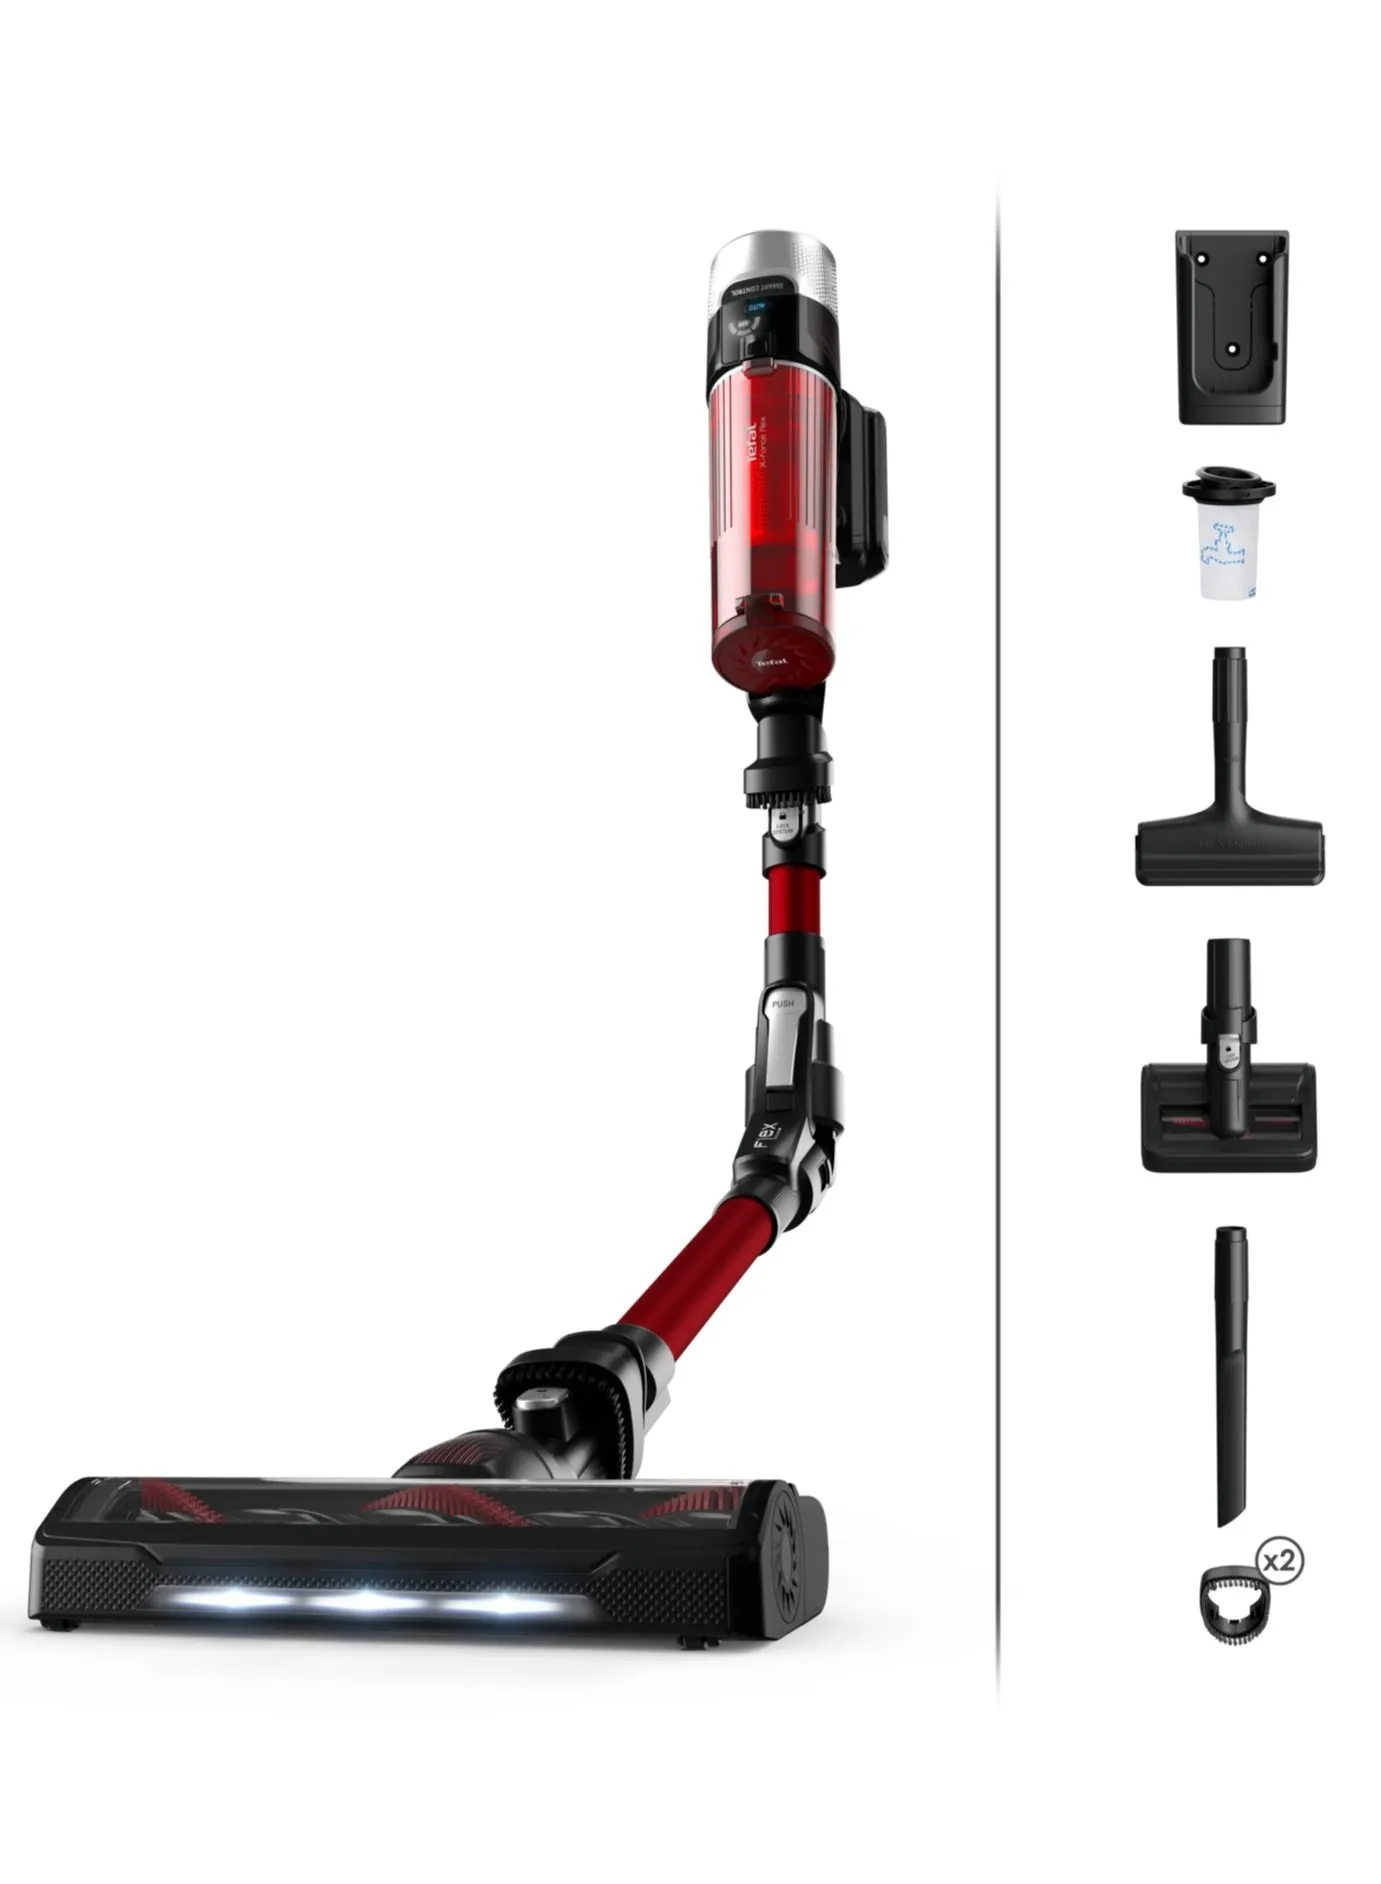 Tefal Cordless Vacuum Cleaner | X-Force Flex 9.60 Vacuum Cleaner Cordless | Animal Care Model | Strong Constant Suction Power |Long-Lasting Battery | Flex Tube System | Automatic Suction Power Adjustment by Floor Type | 2 Years Warranty 100 W TY2079HO Red